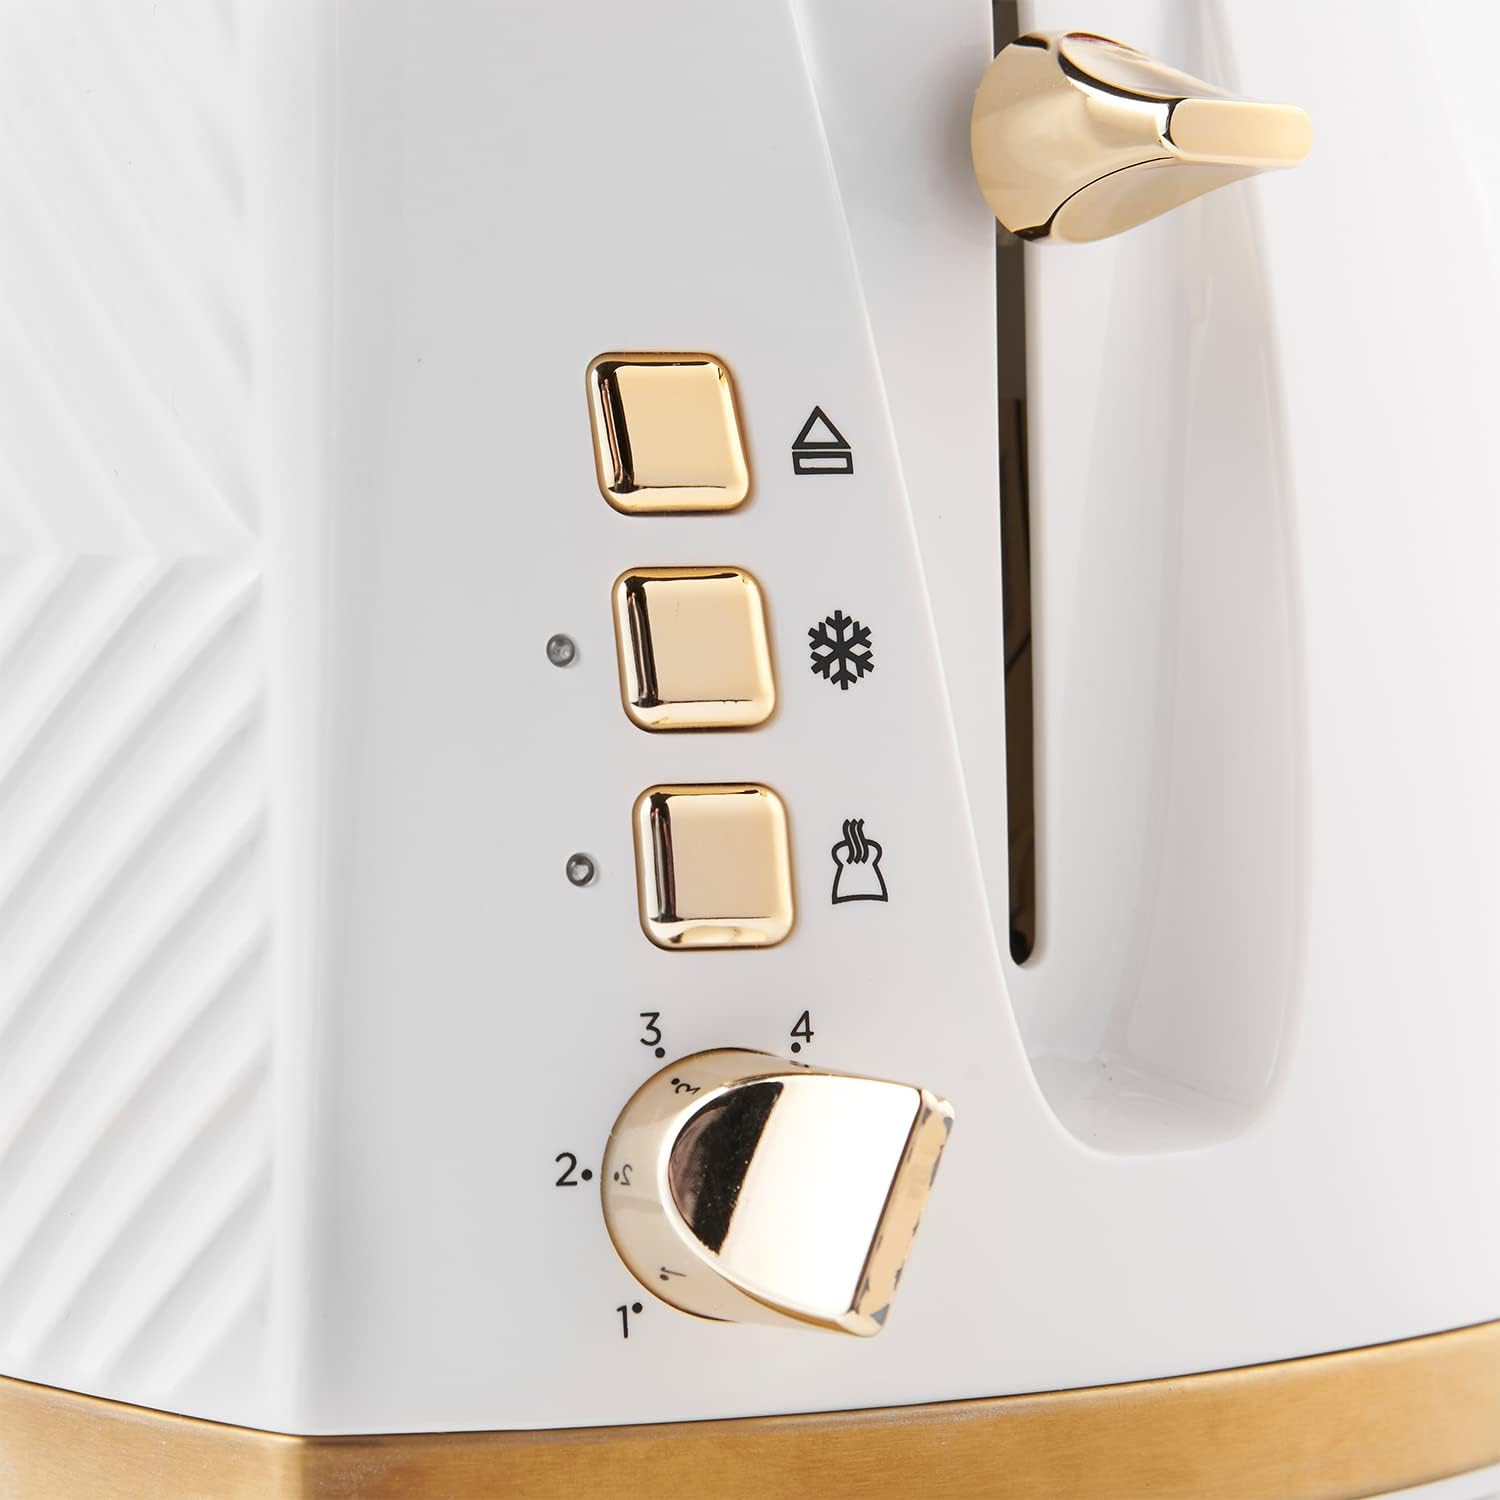 Russell Hobbs Groove 2 Slice Toaster (High Lift, Extra Wide Slots, 6 Browning levels, Frozen/Cancel/Reheat function - Illuminated buttons, Removable crumb tray, 850W, Black, Brushed gold accents)26390